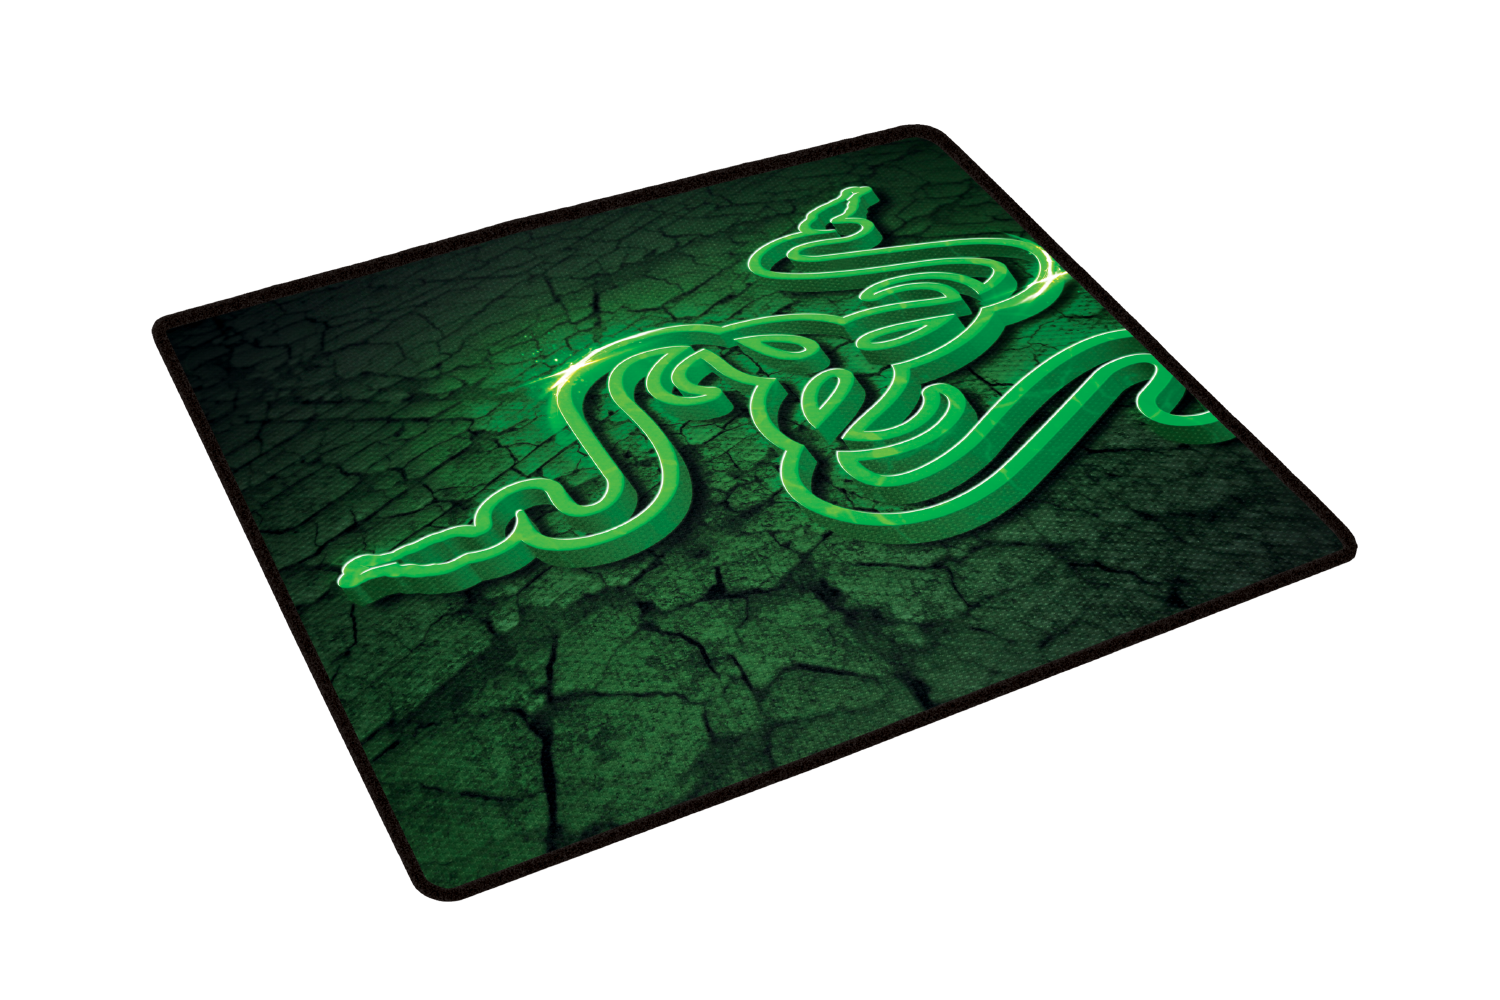 Razer Goliathus Control Fissure Edition Large Gaming Mouse Pad / Mat 444x355mm